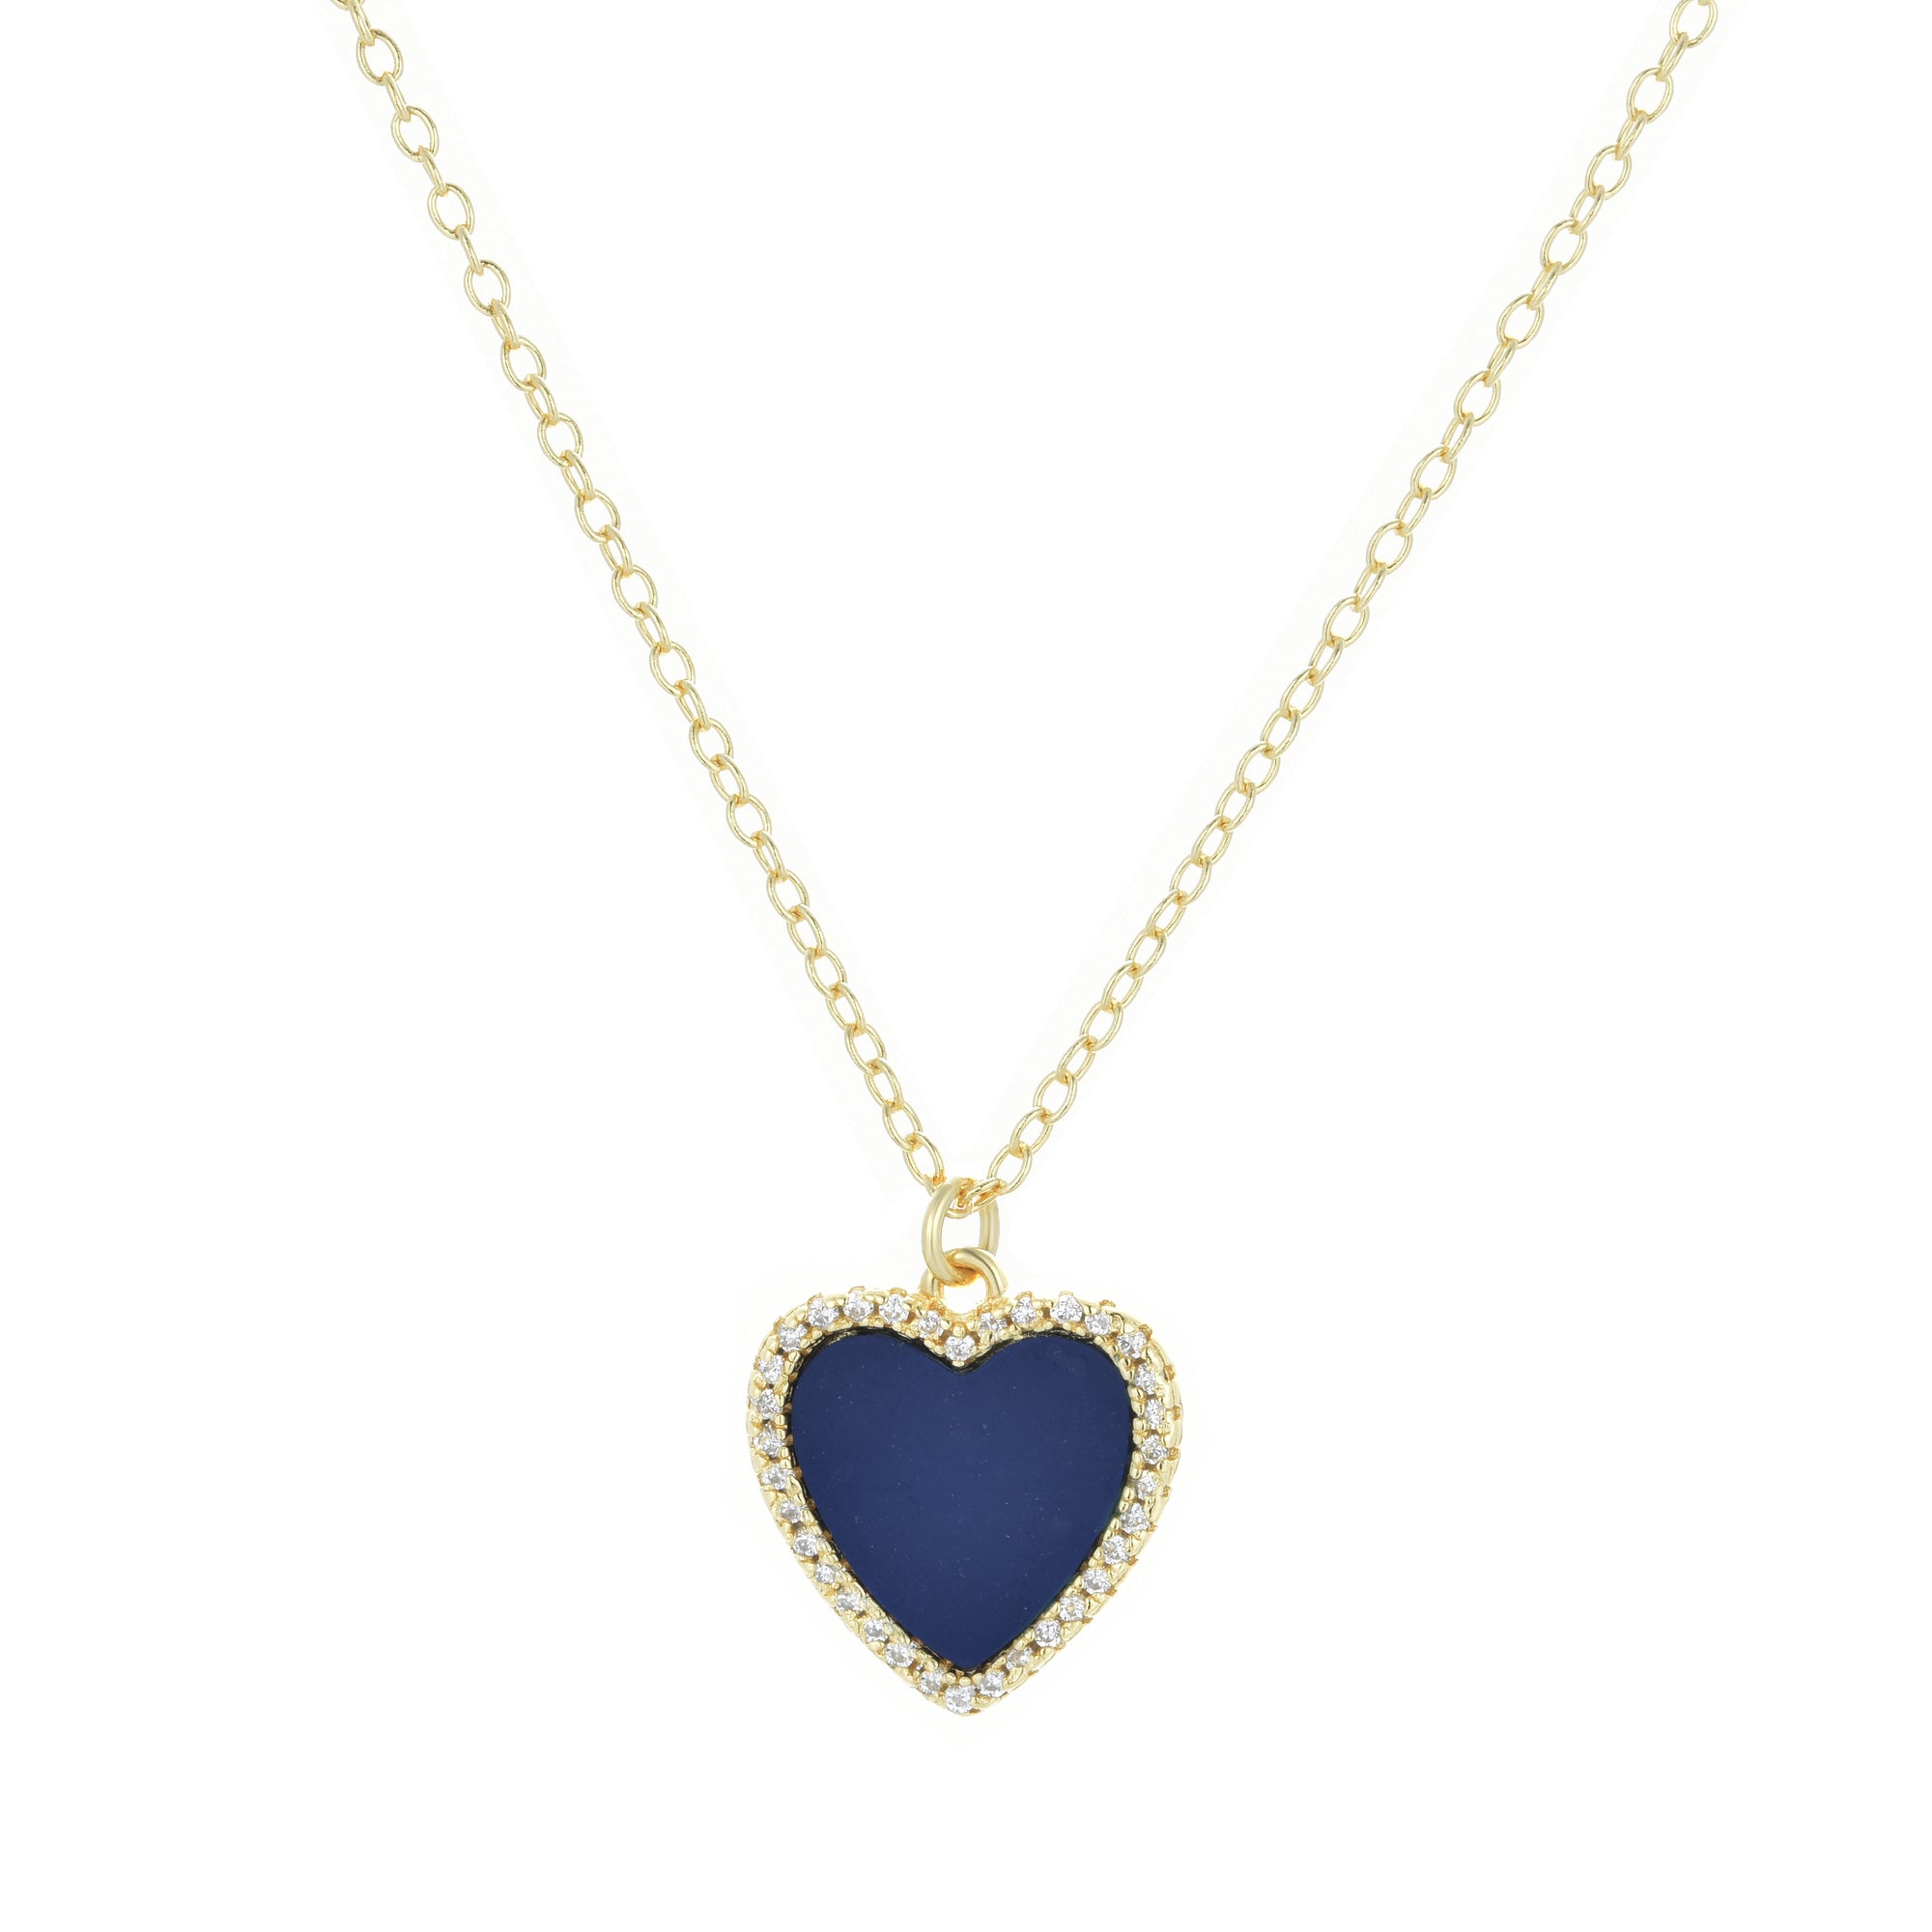 blue lapis heart necklace with crystals gold